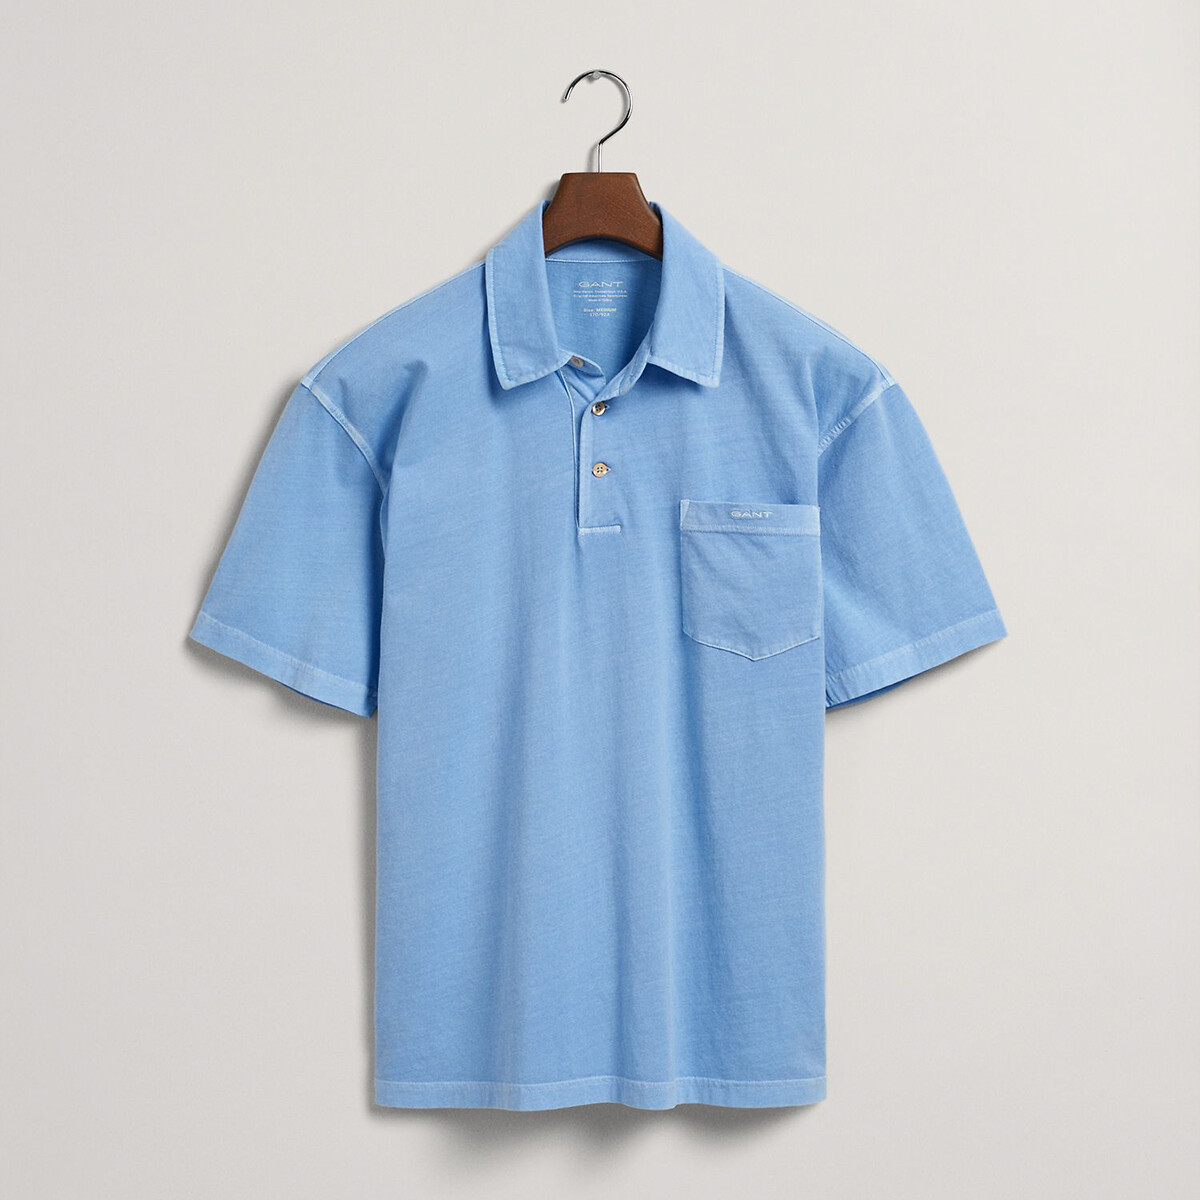 Sunfaded Polo Shirt in Jersey Cotton